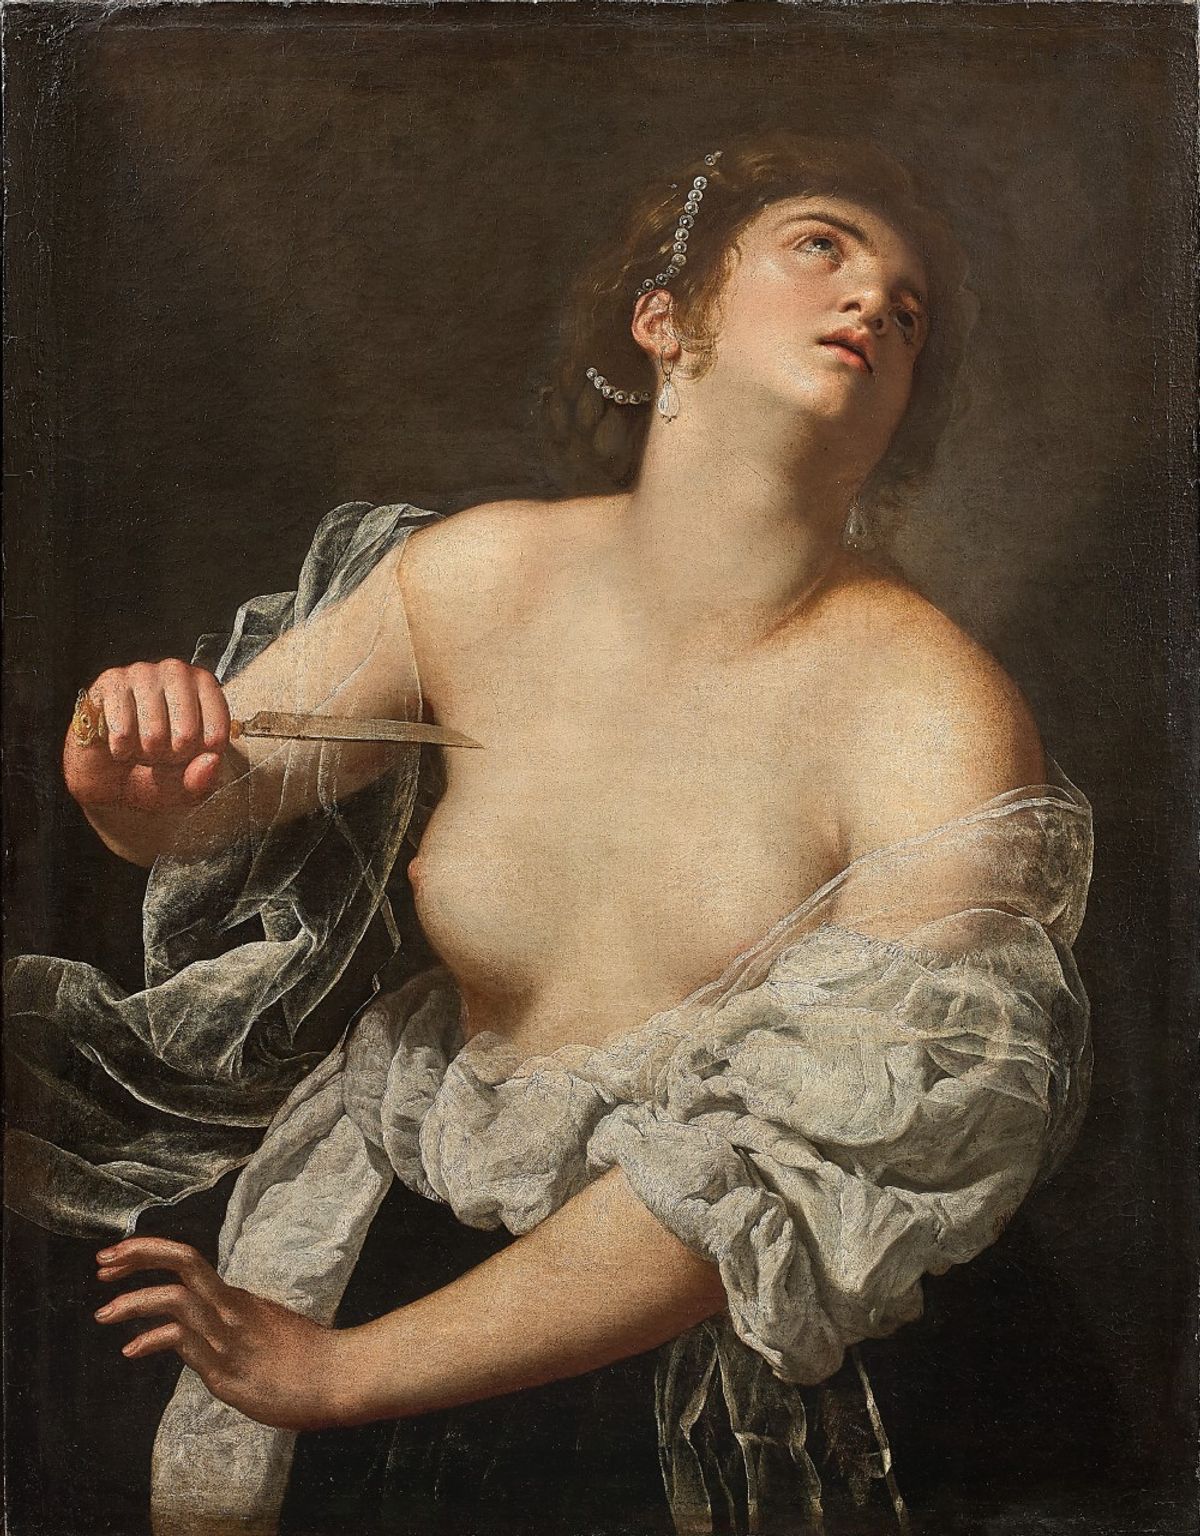 The Parisian auction house Artcurial says this painting is by the 17th-century artist Artemisia Gentileschi Courtesy of Artcurial